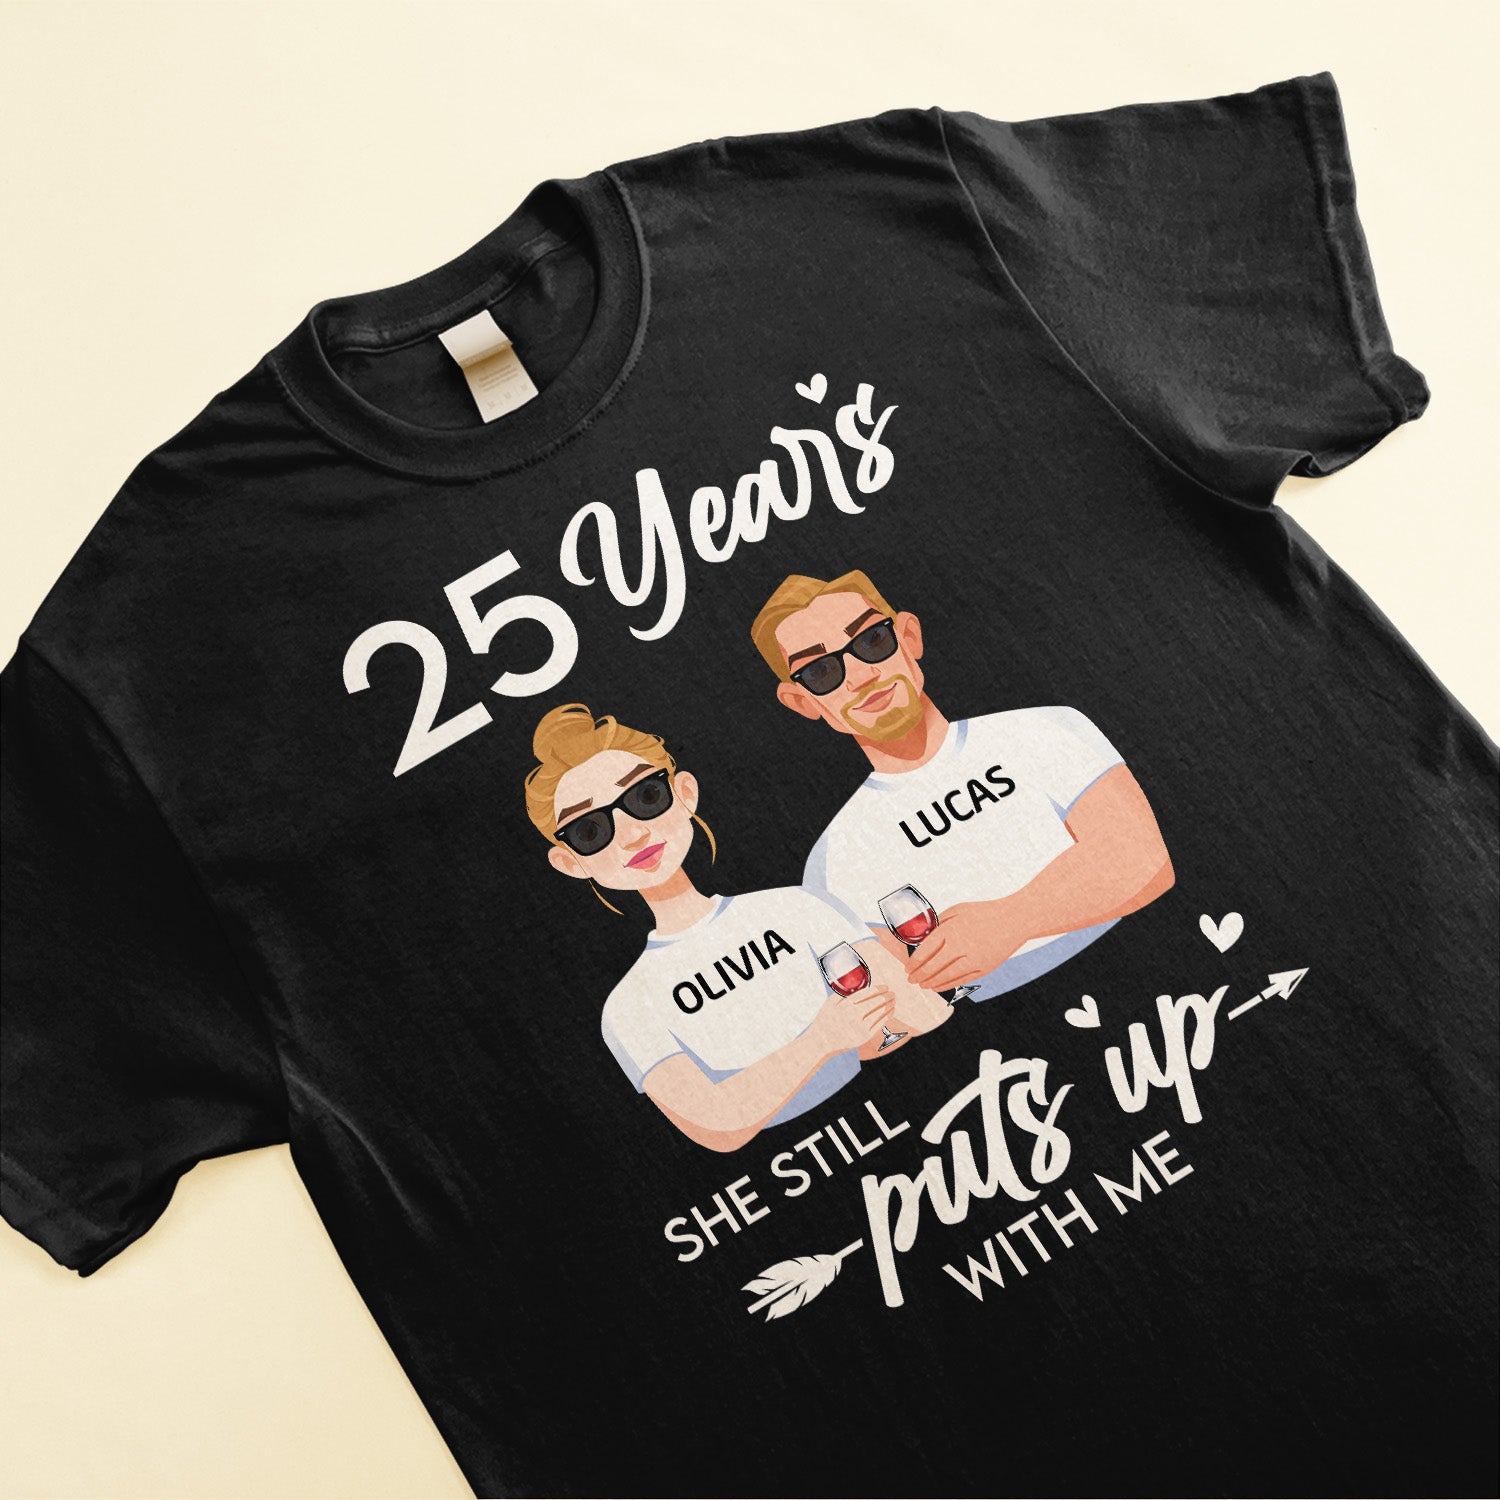 Funny Couple Shirts, His and Hers Matching Shirts, Anniversary